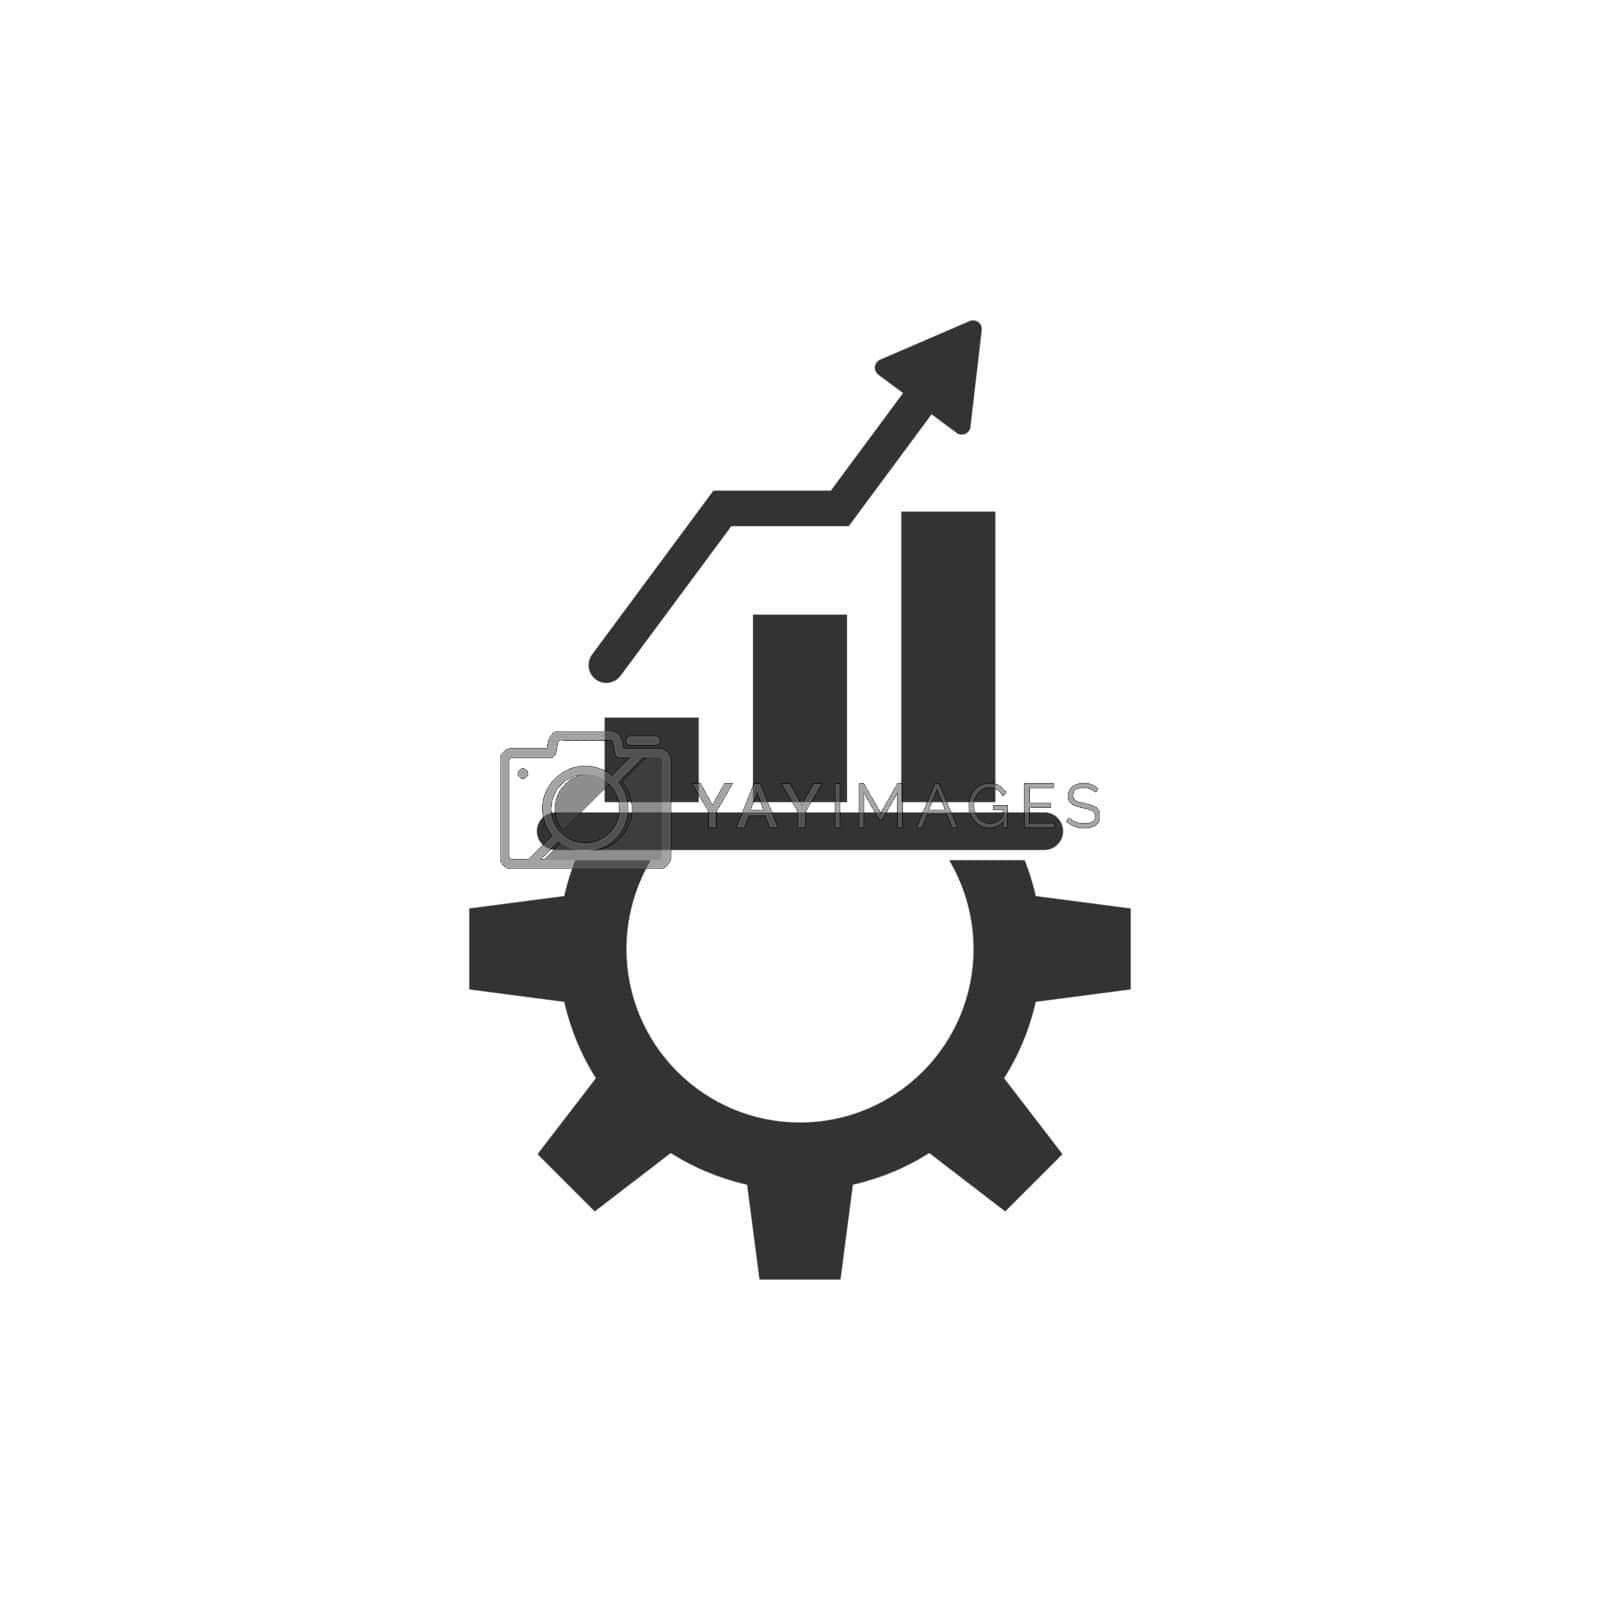 Royalty free image of Productivity icon in flat style. Process strategy vector illustration on isolated background. Seo analytics sign business concept. by LysenkoA